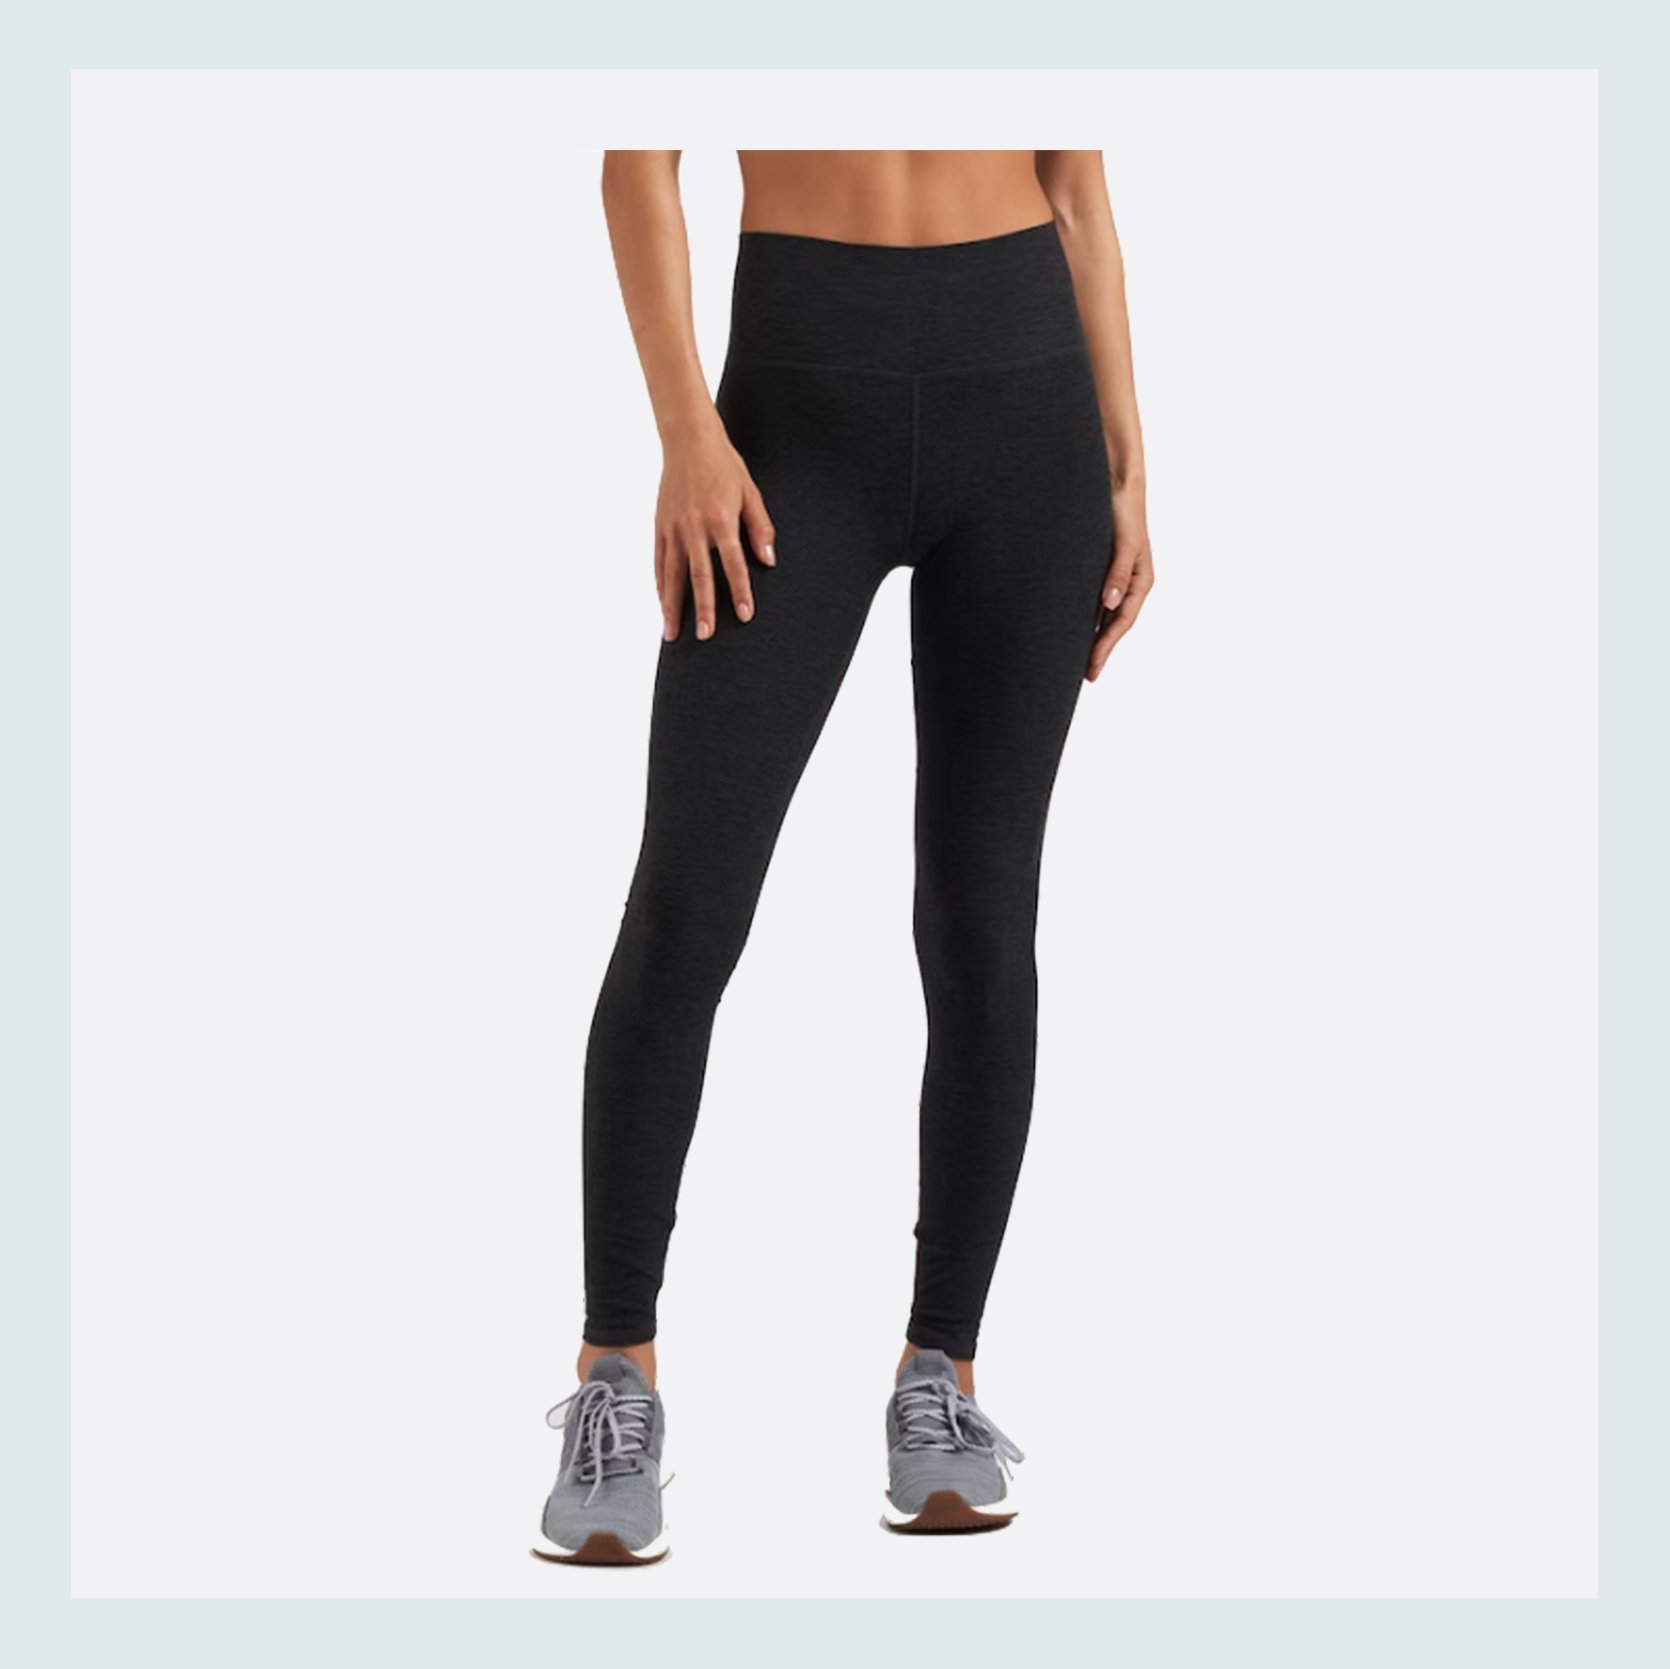 Leggings Review: In Search Of The Perfect Leggings That Won't Slip